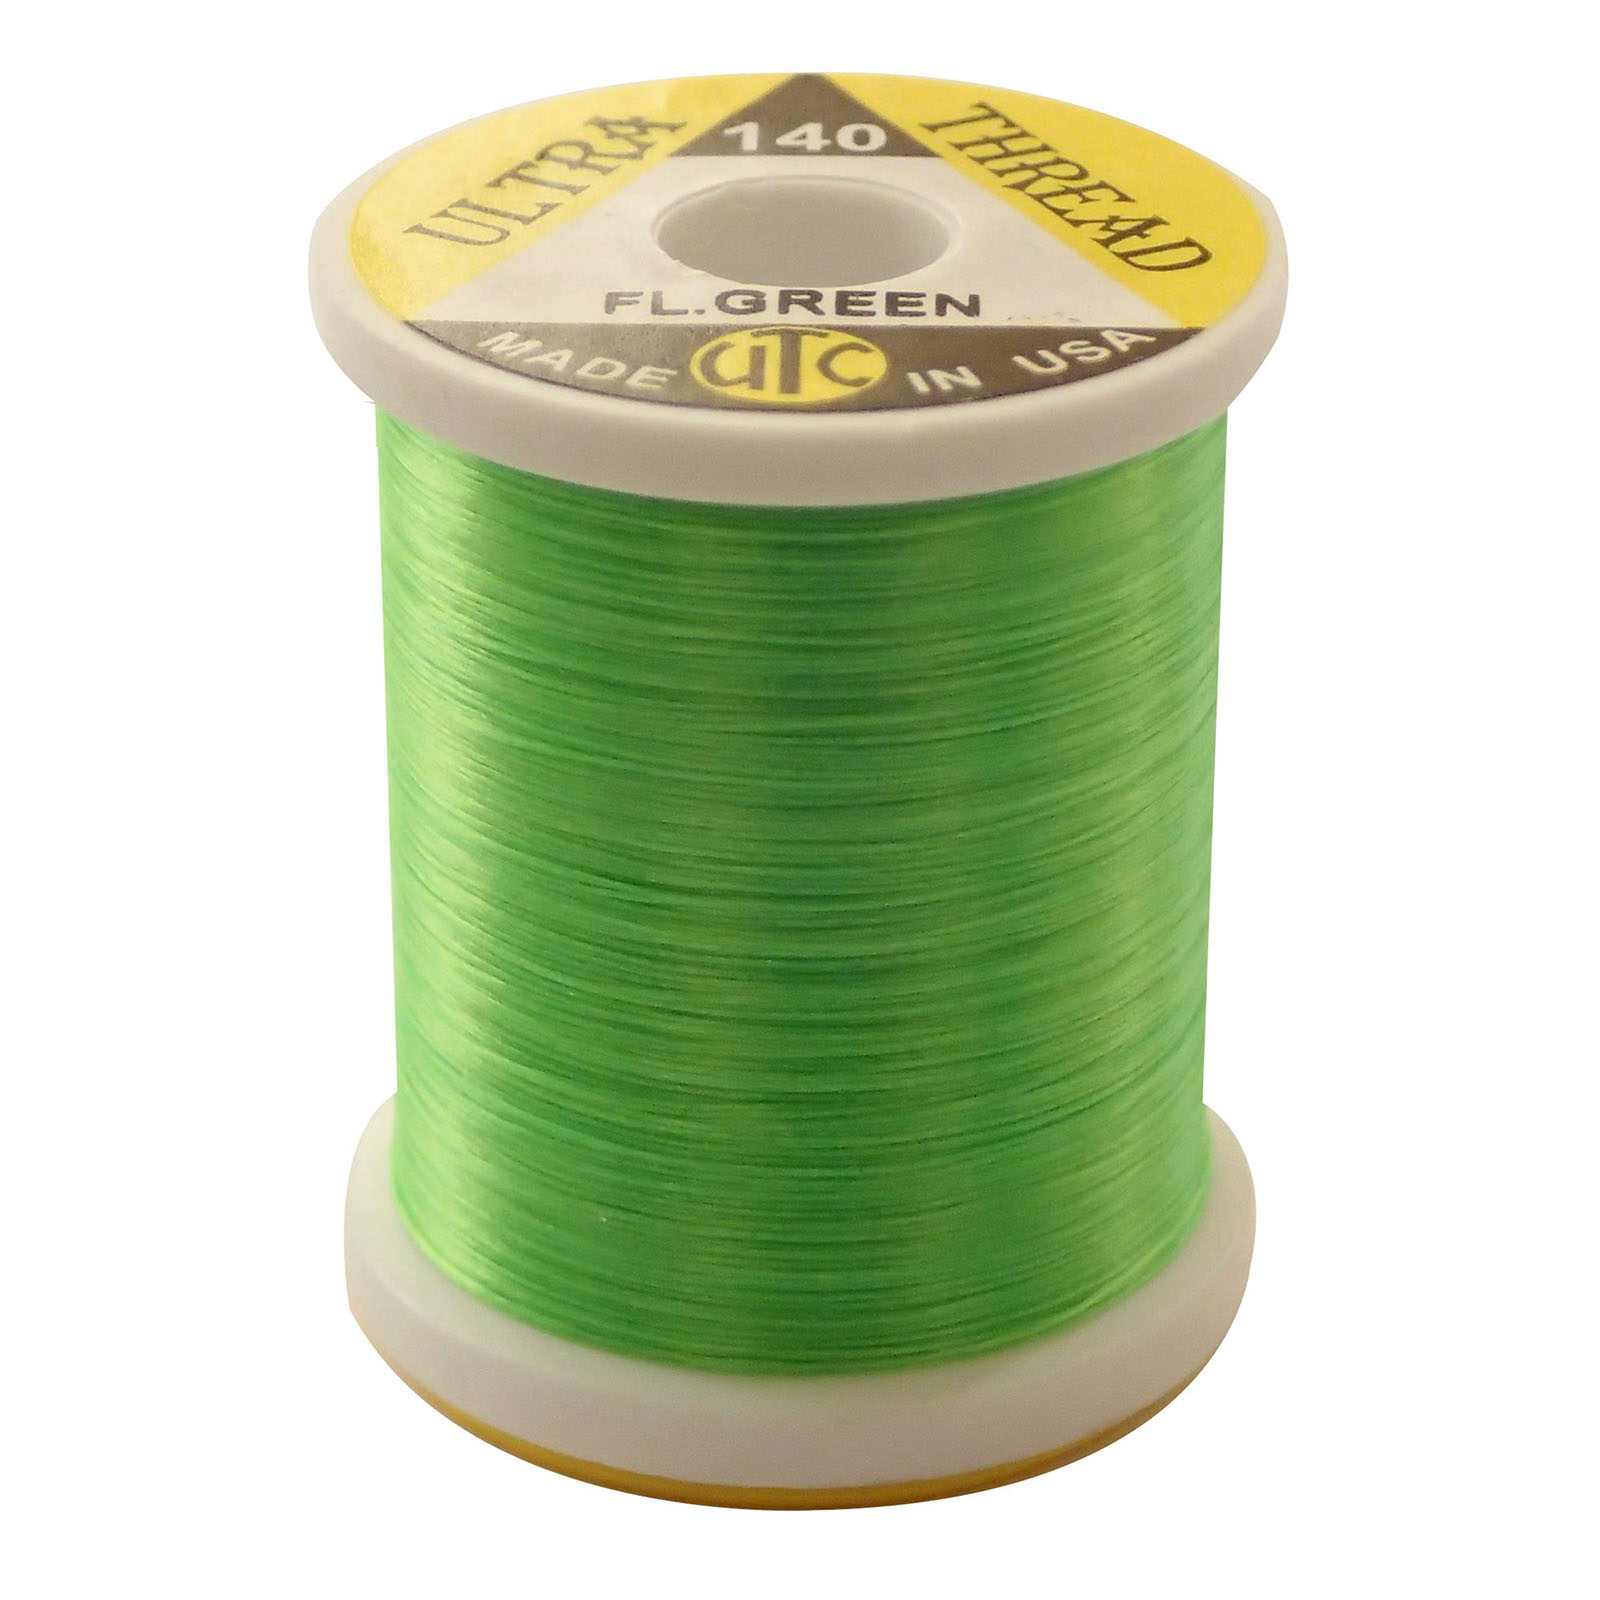 Veevus Fly Tying Thread 16/0, Salmon Fly Thread, For Sale Online